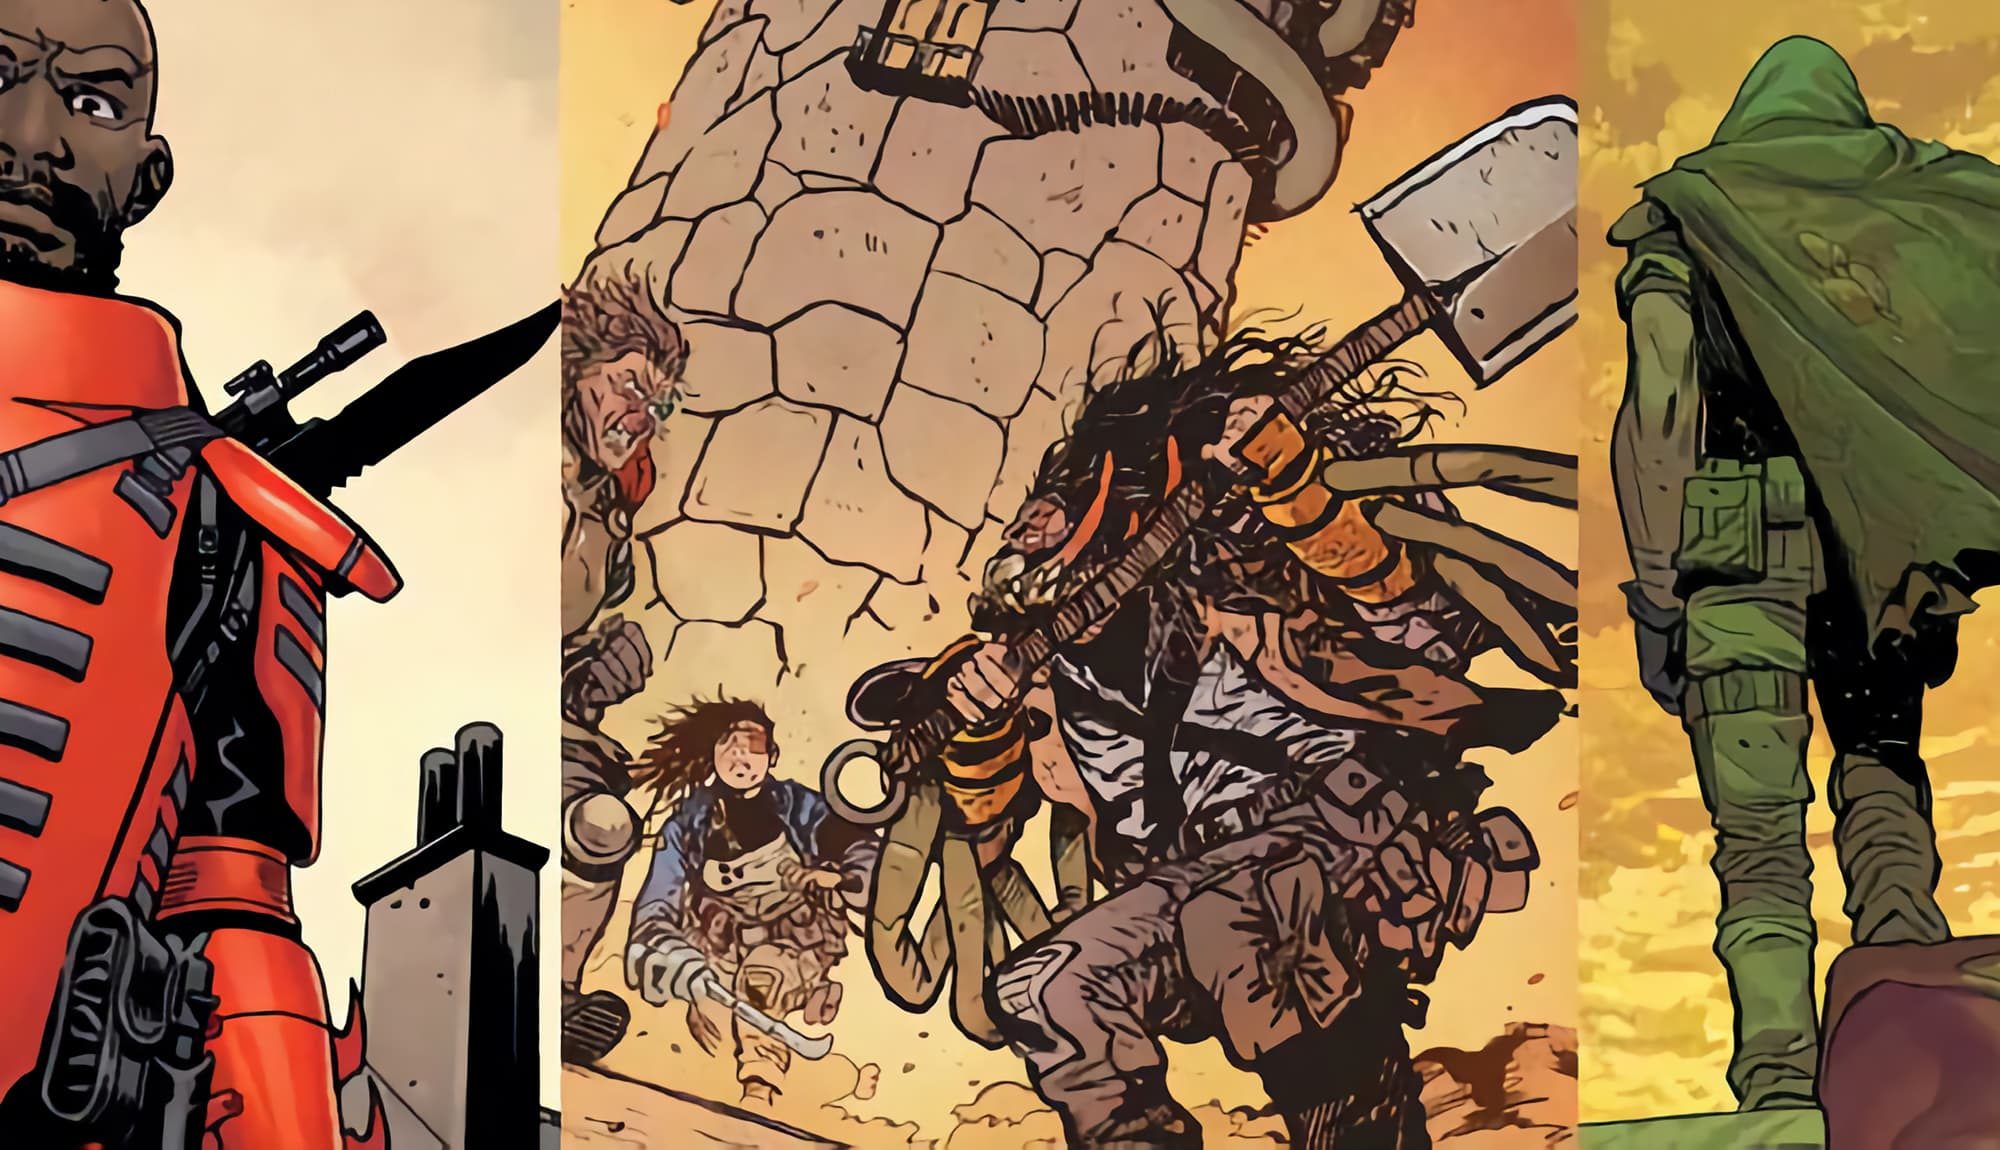 This Week’s Comics: Extremity #12, Oblivion Song #1, The Walking Dead #177 & Vol 29!